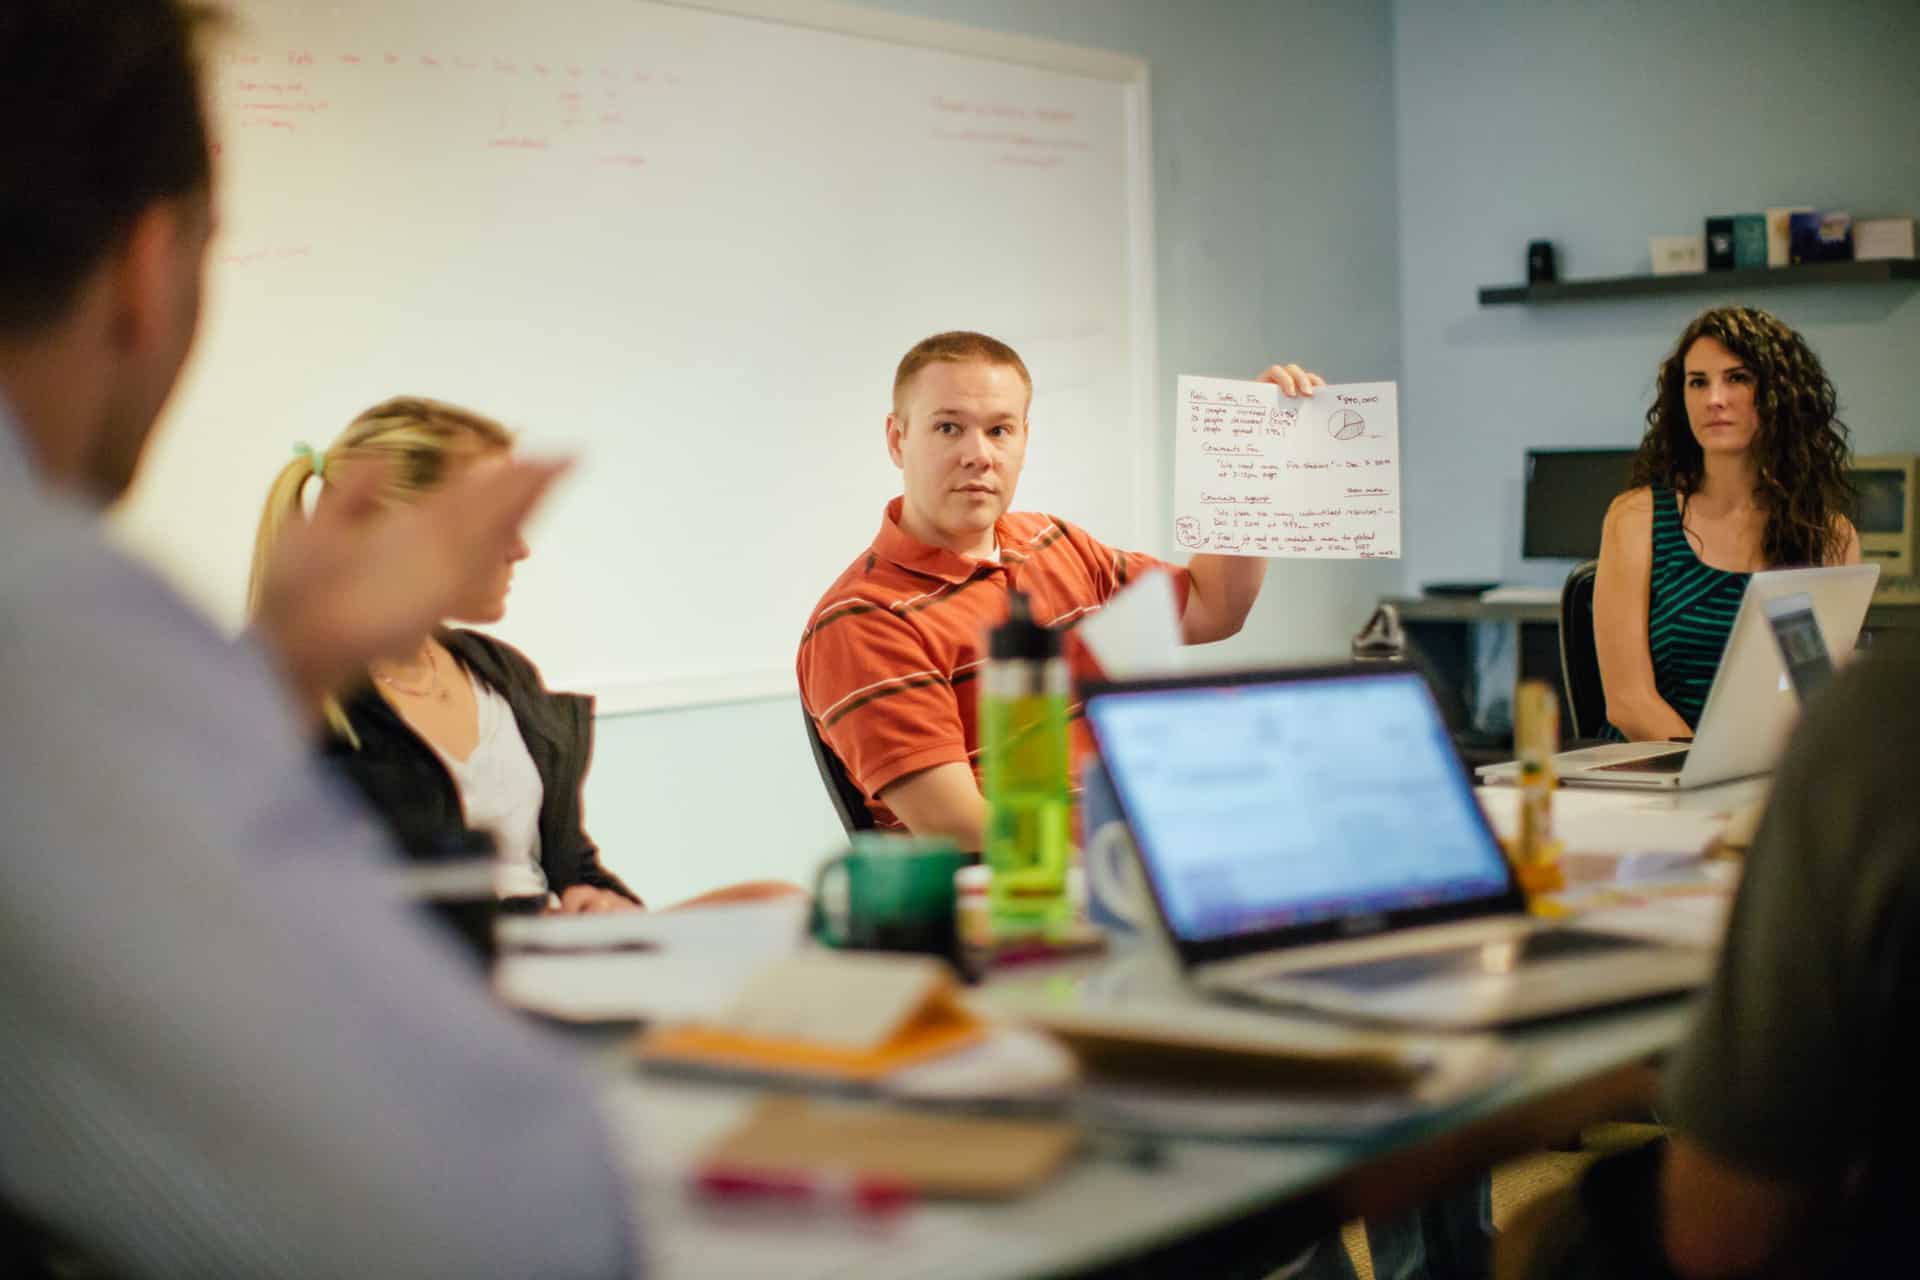 A man holds up a diagram during a CauseLabs strategic workshop.